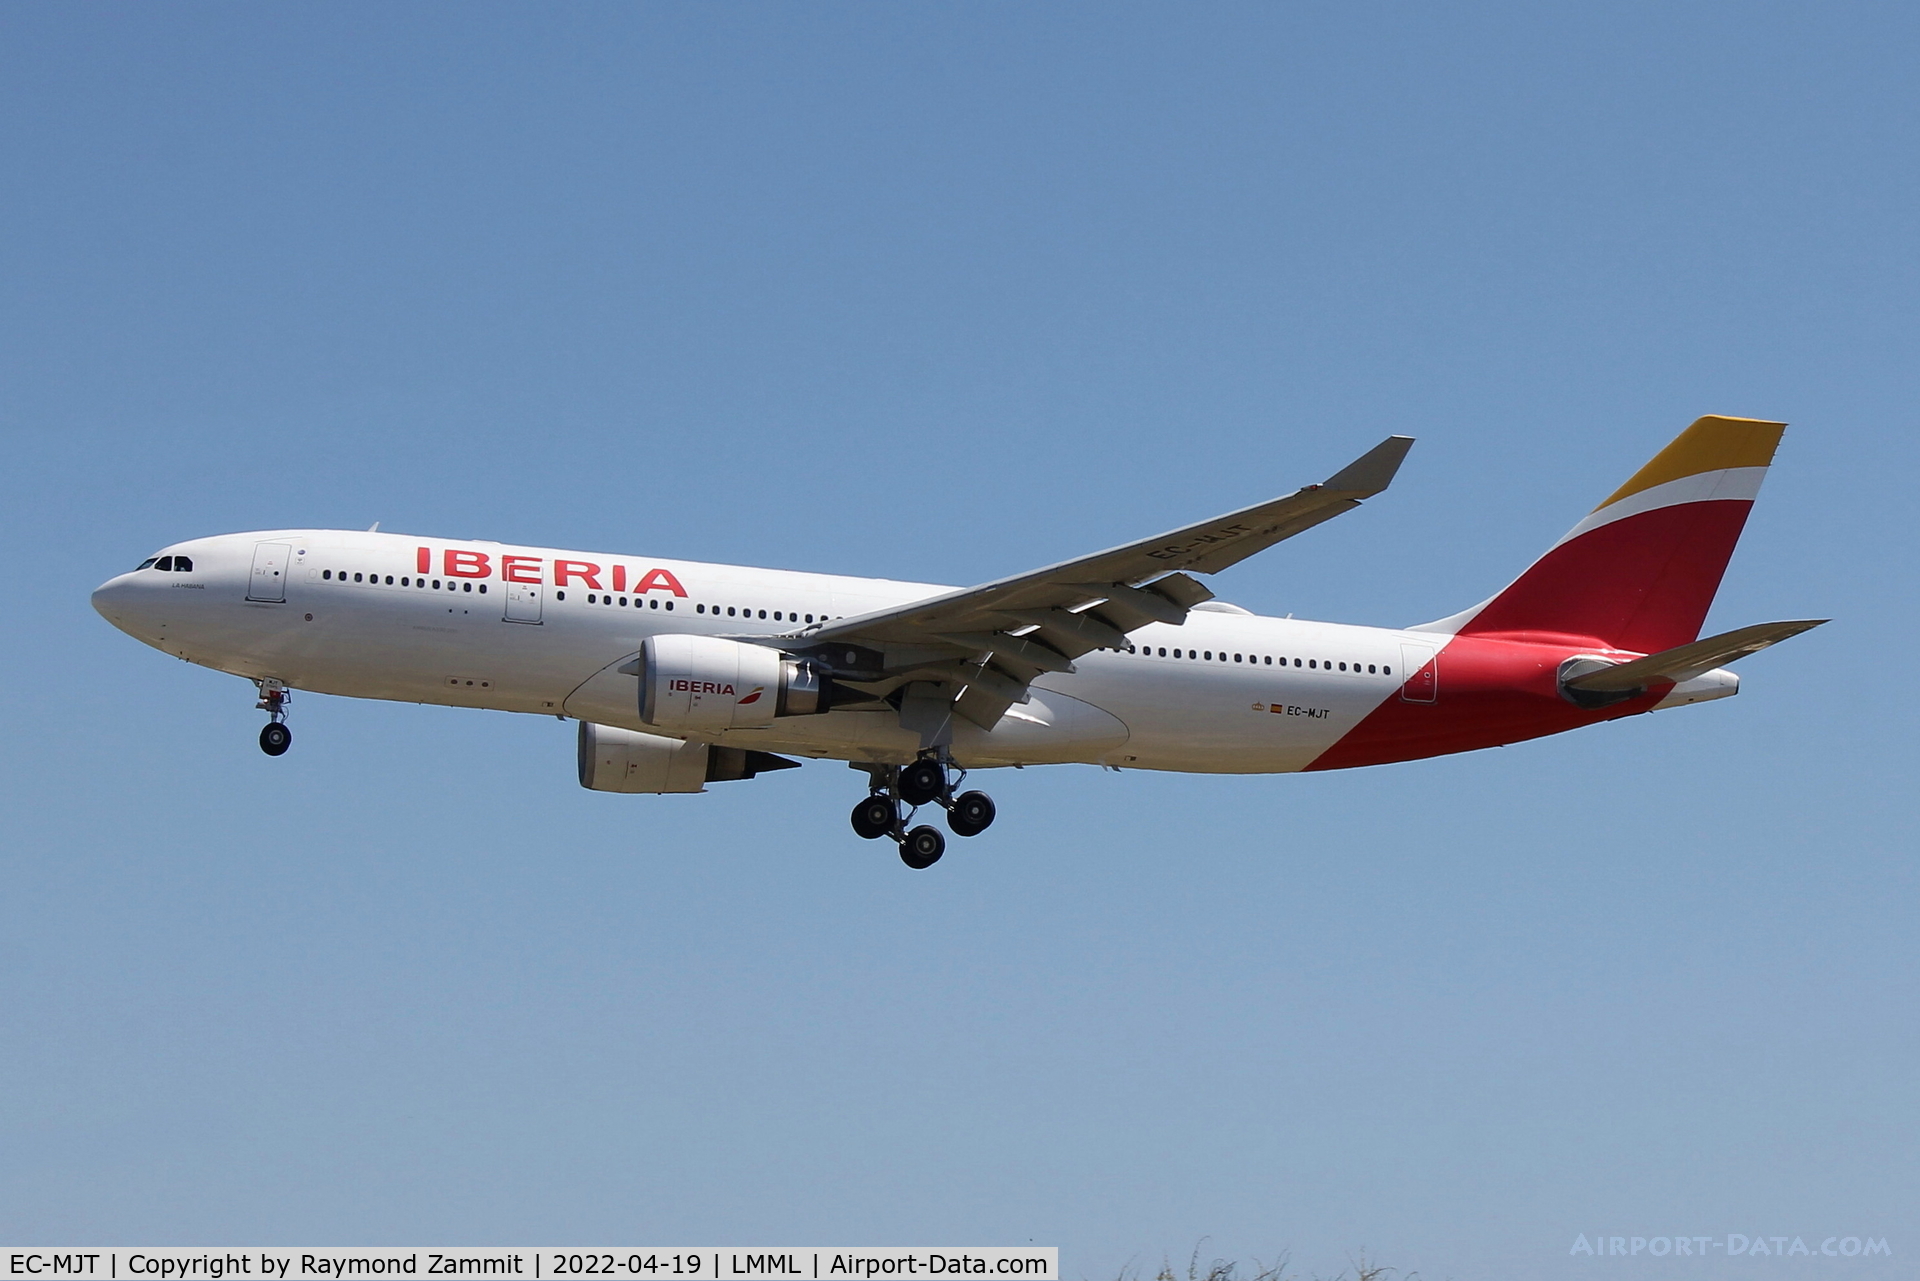 EC-MJT, 2016 Airbus A330-202 C/N 1714, A330 EC-MJT of Iberia in it's last landing in Iberia colours before being delivered to the Spanish Air Force in the all grey colour scheme in the MRTT role.